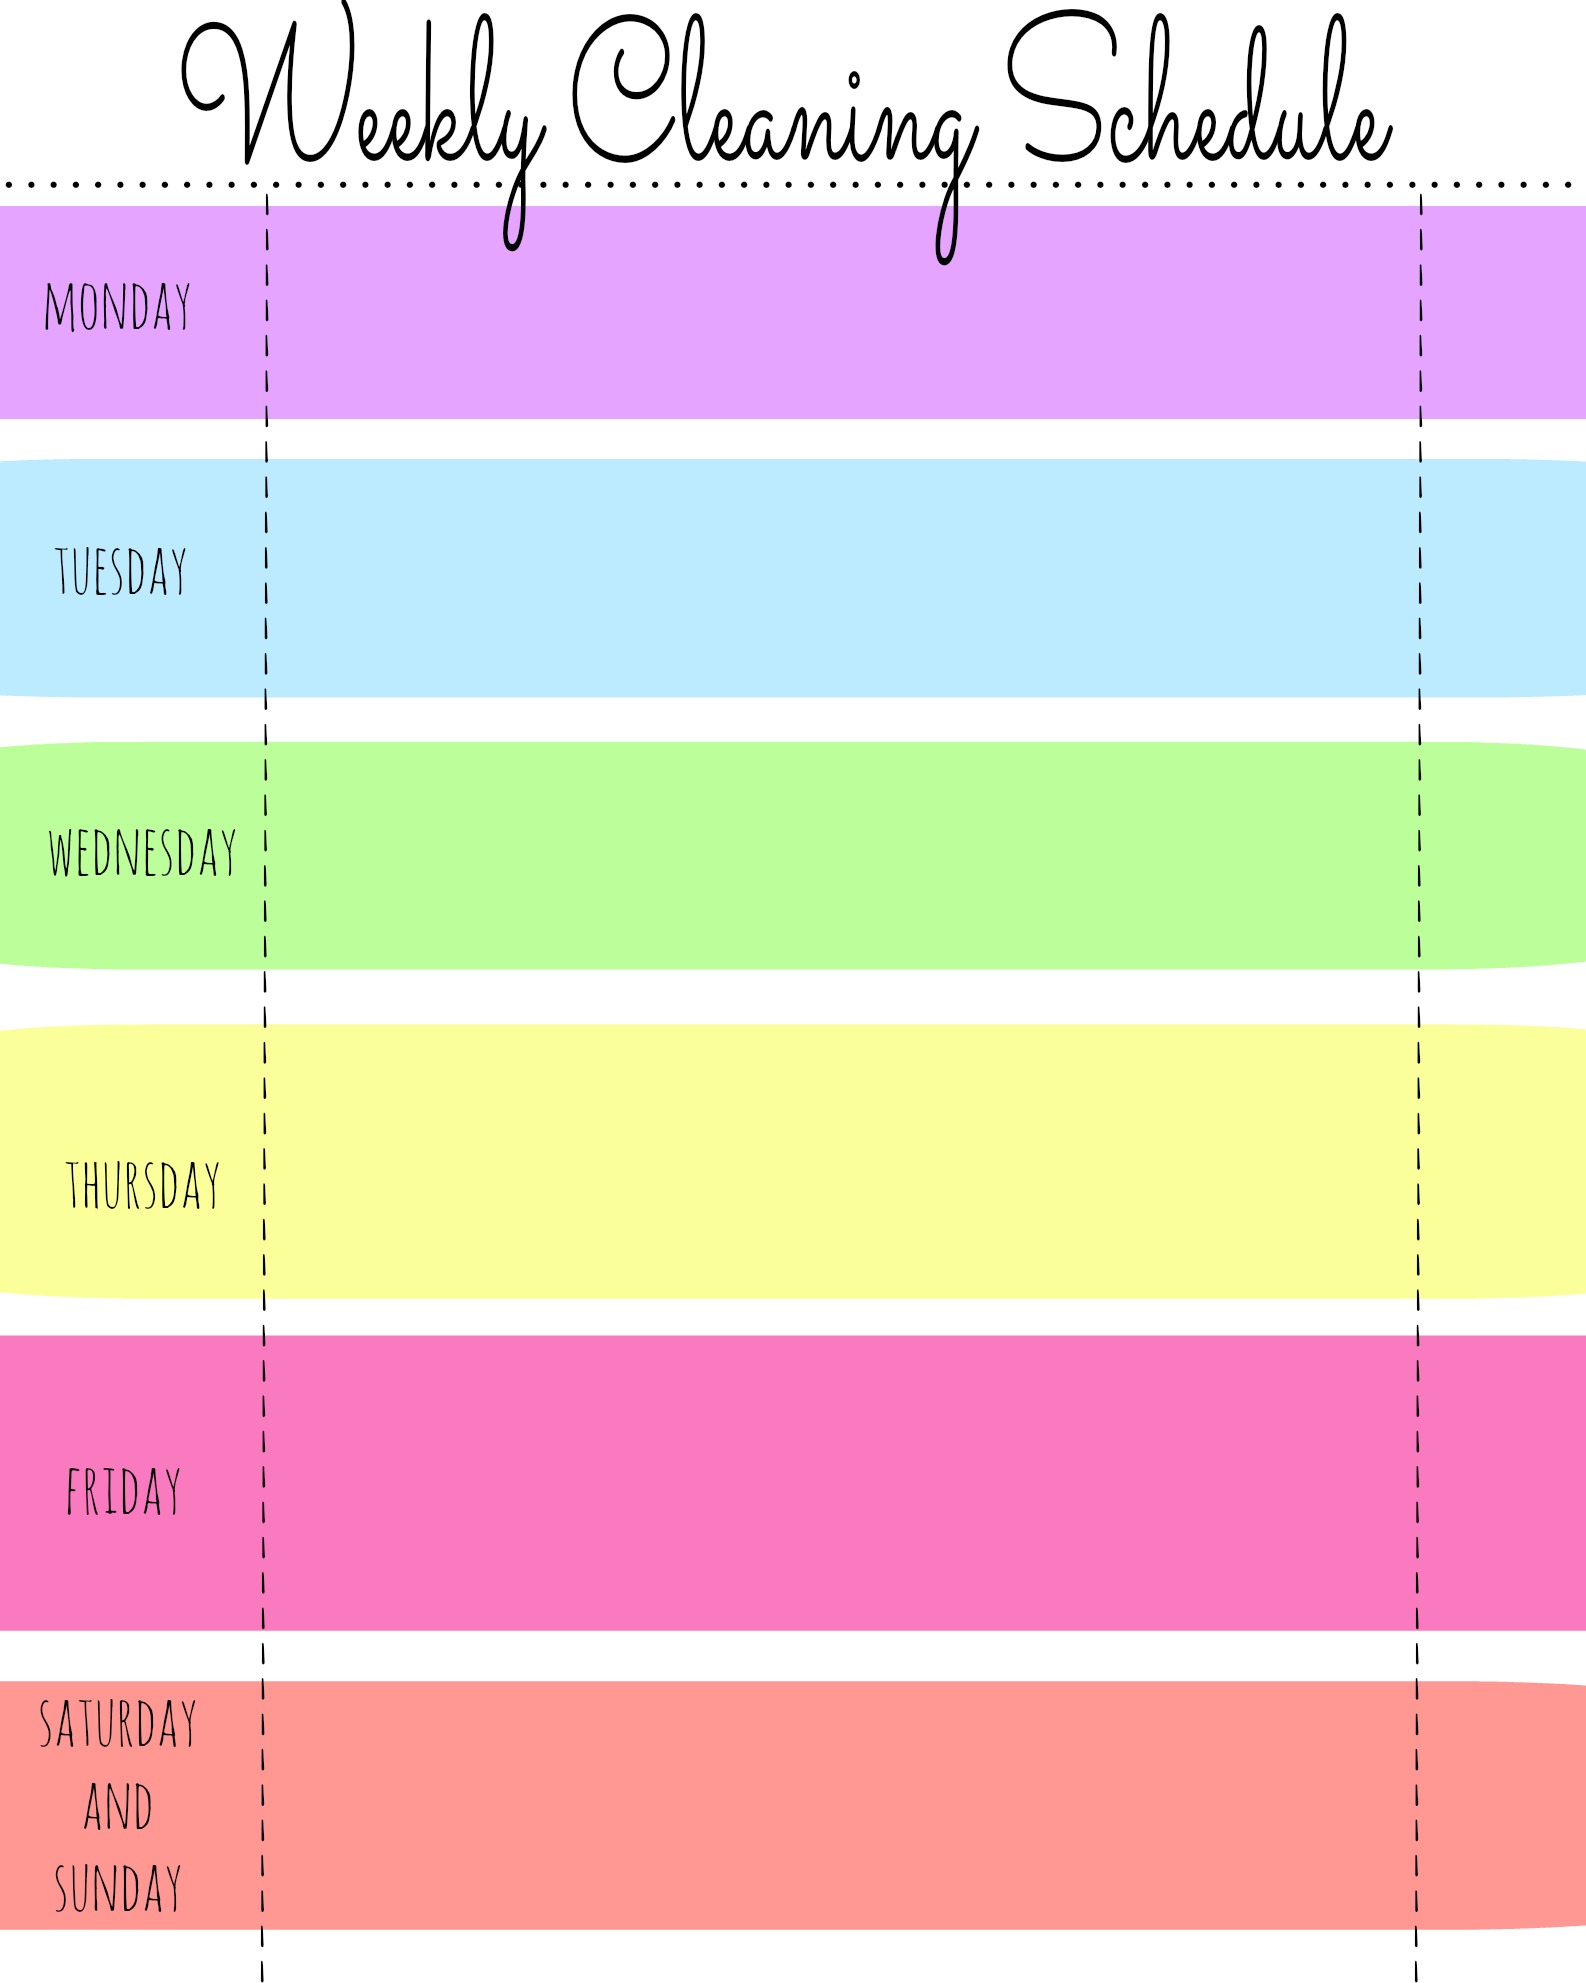 schedule-printable-images-gallery-category-page-1-printablee